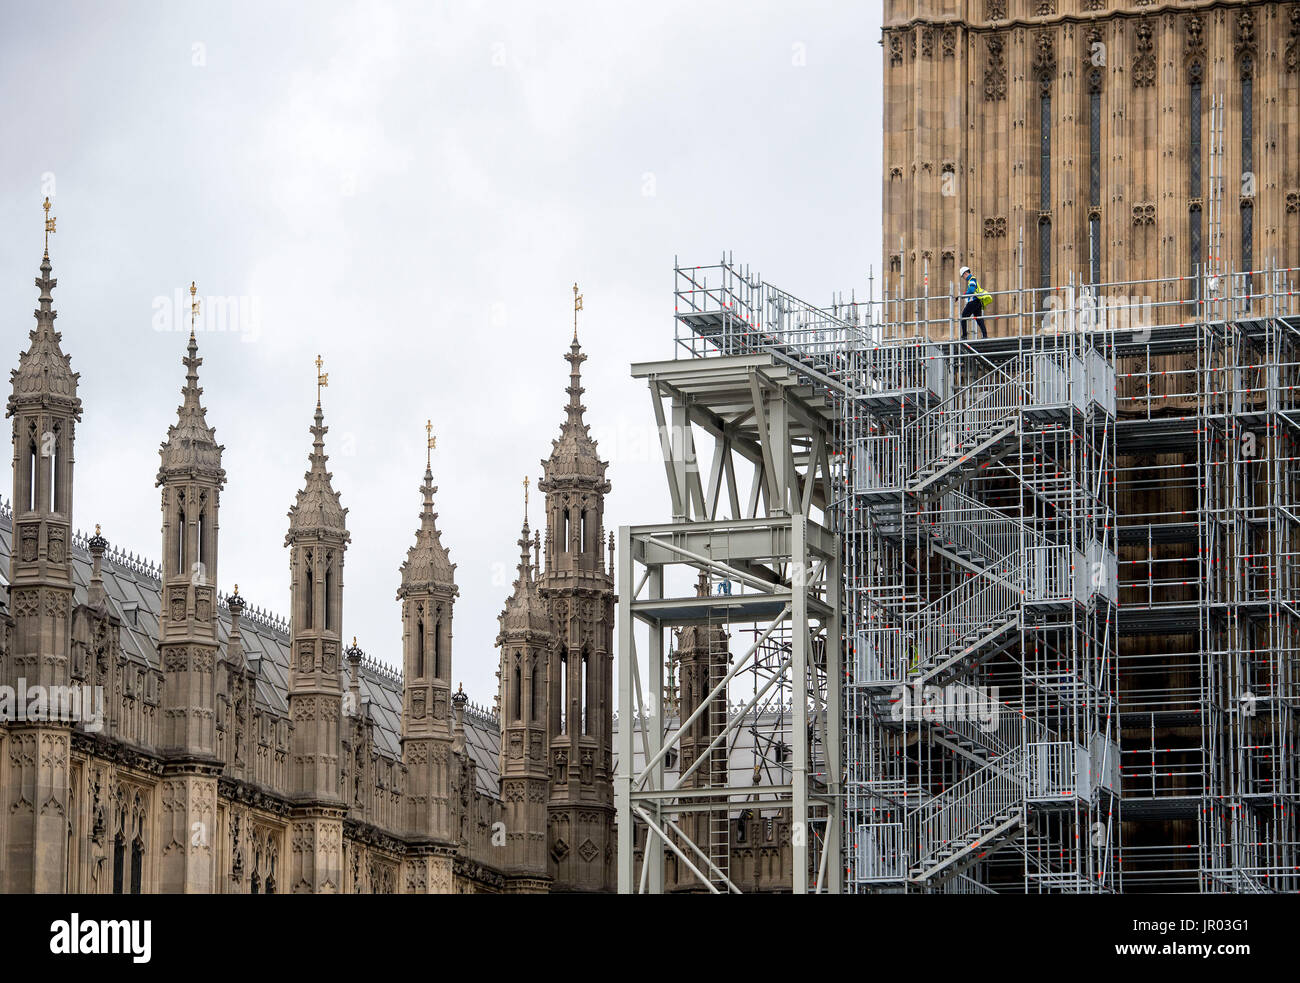 Scaffolding continues to be erected on the Elizabeth Tower at the Palace of Westminster, London, as part of the conservation work on the landmark. Stock Photo